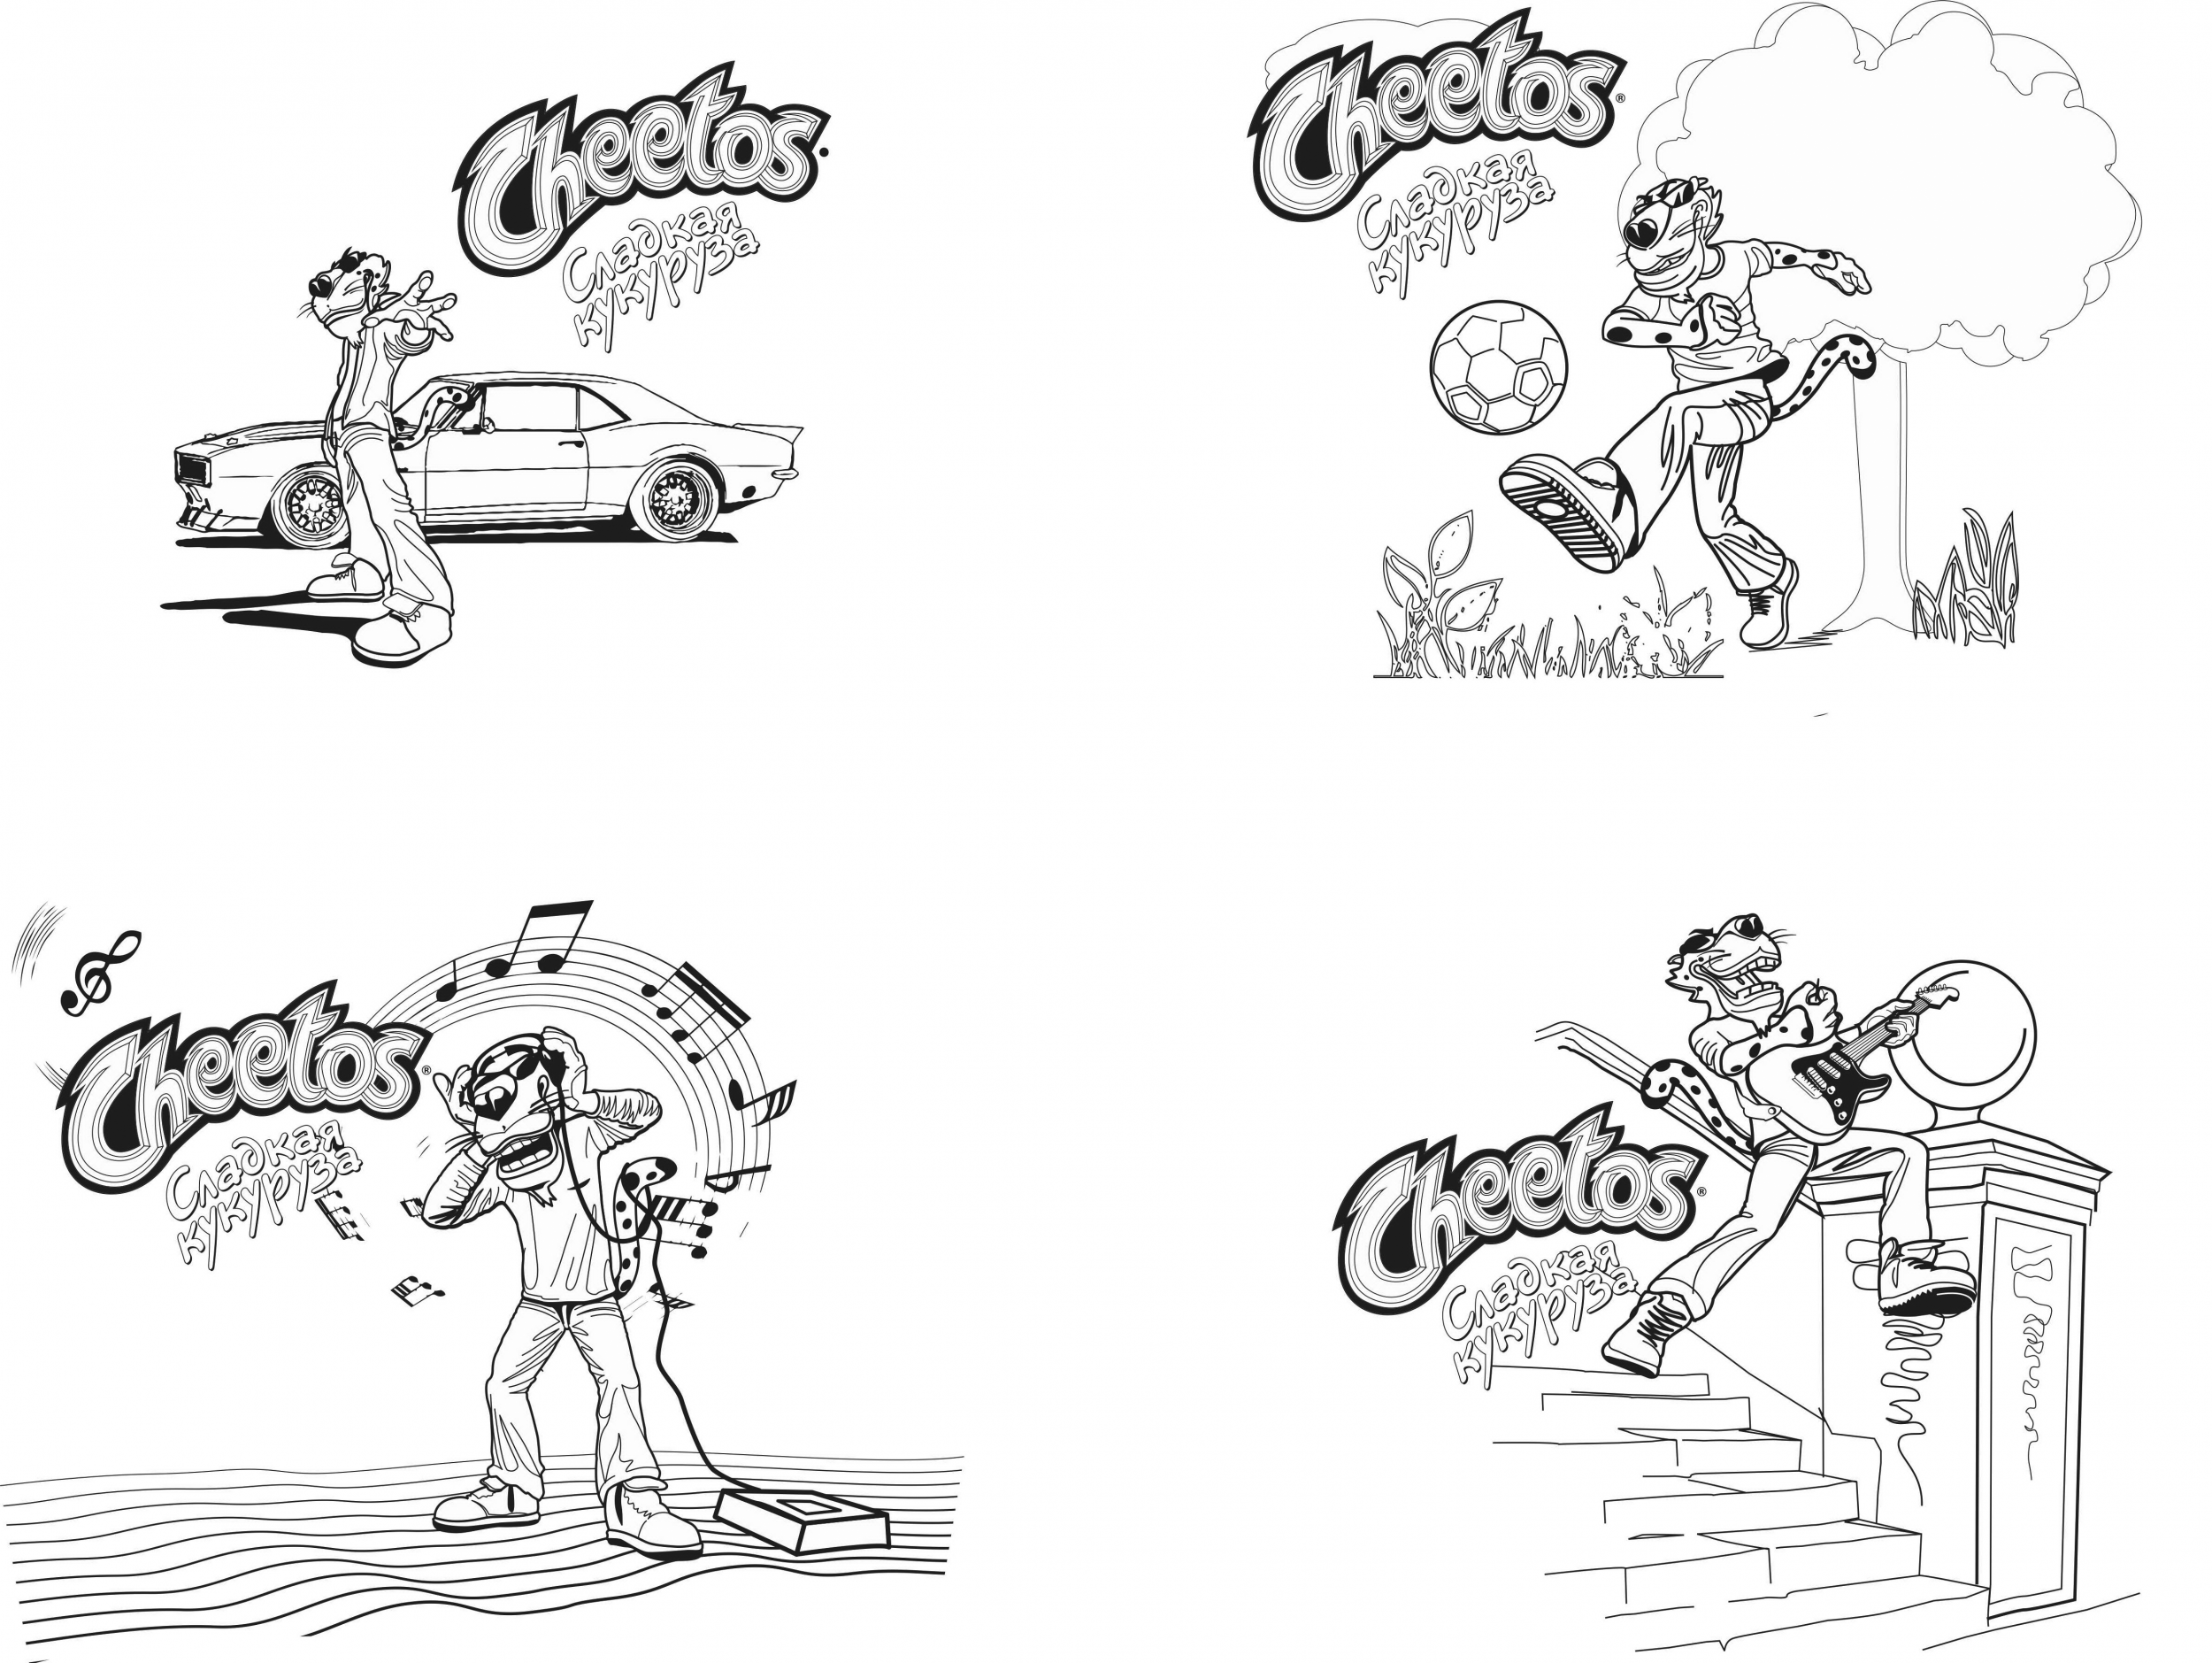 cheetos-now.png